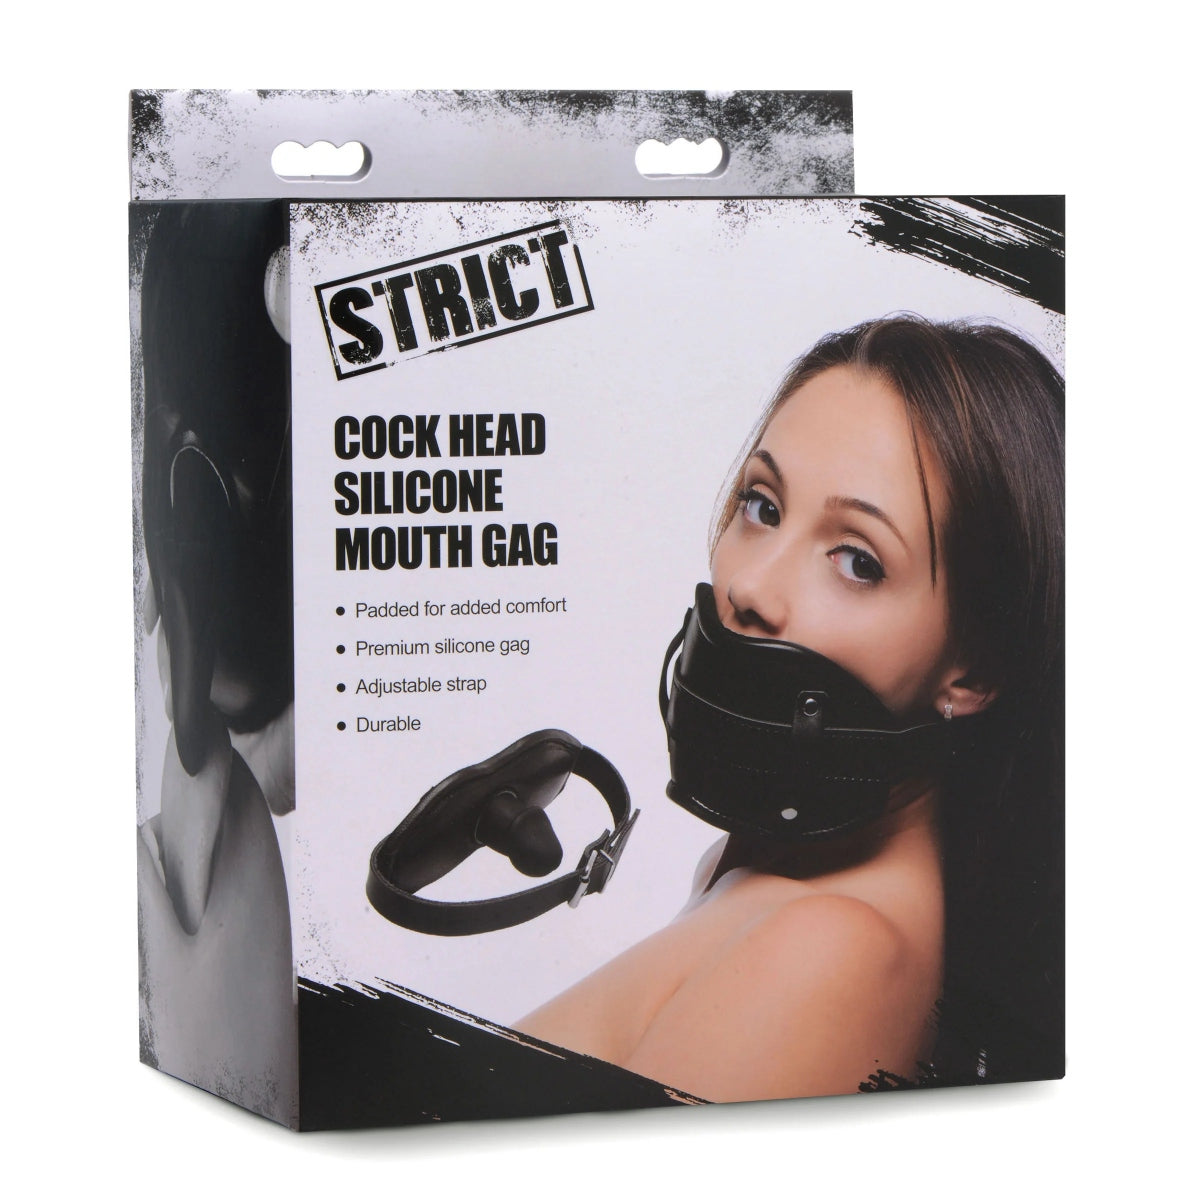 Strict Cock Head Silicone Mouth Gag Black